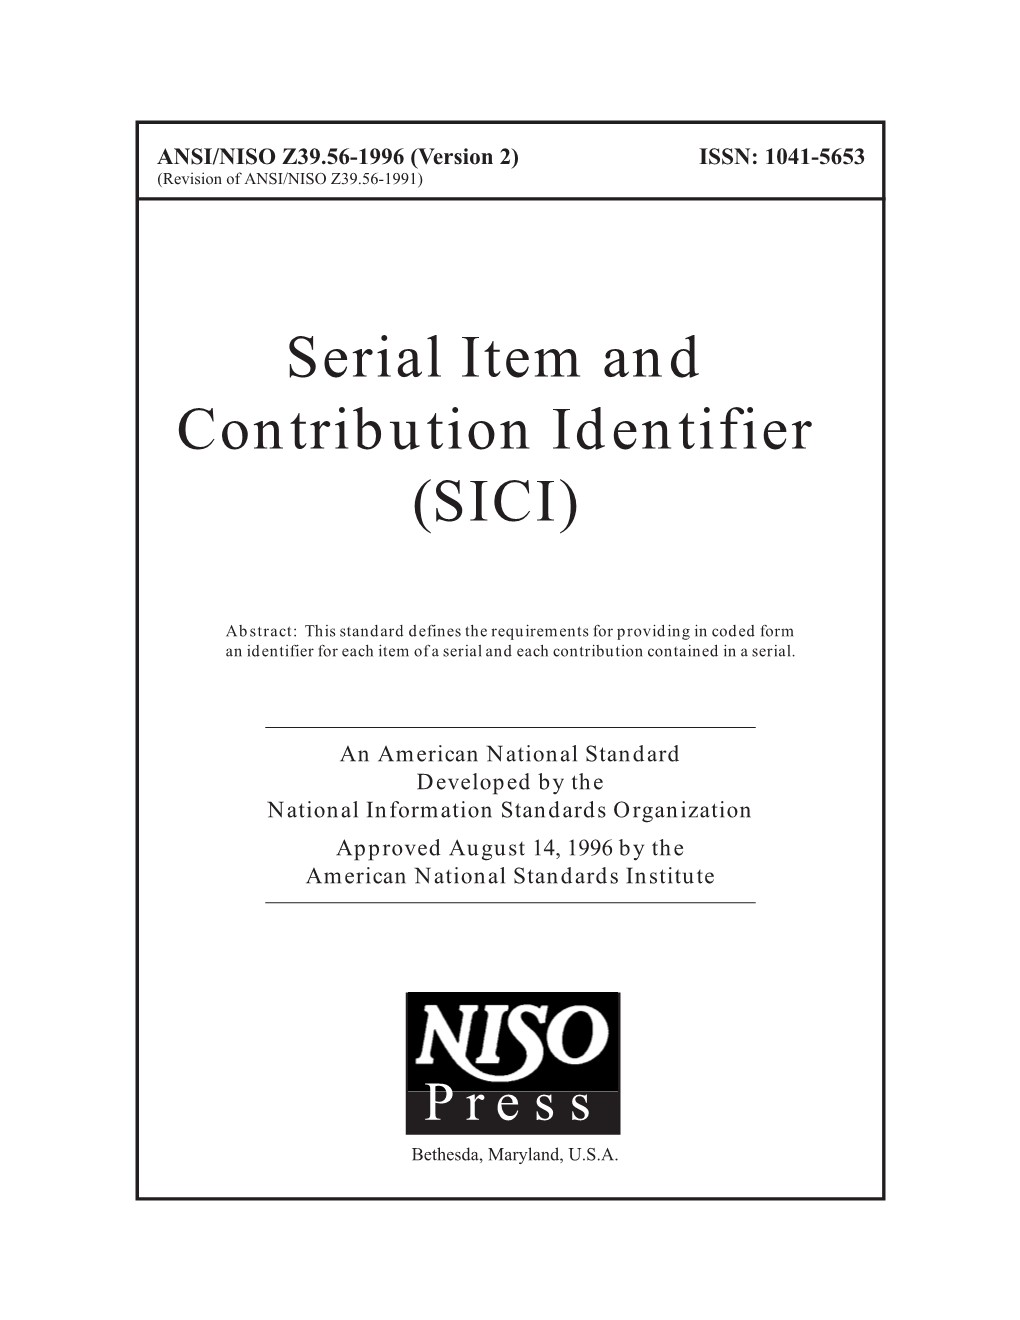 Serial Item and Contribution Identifier (SICI)